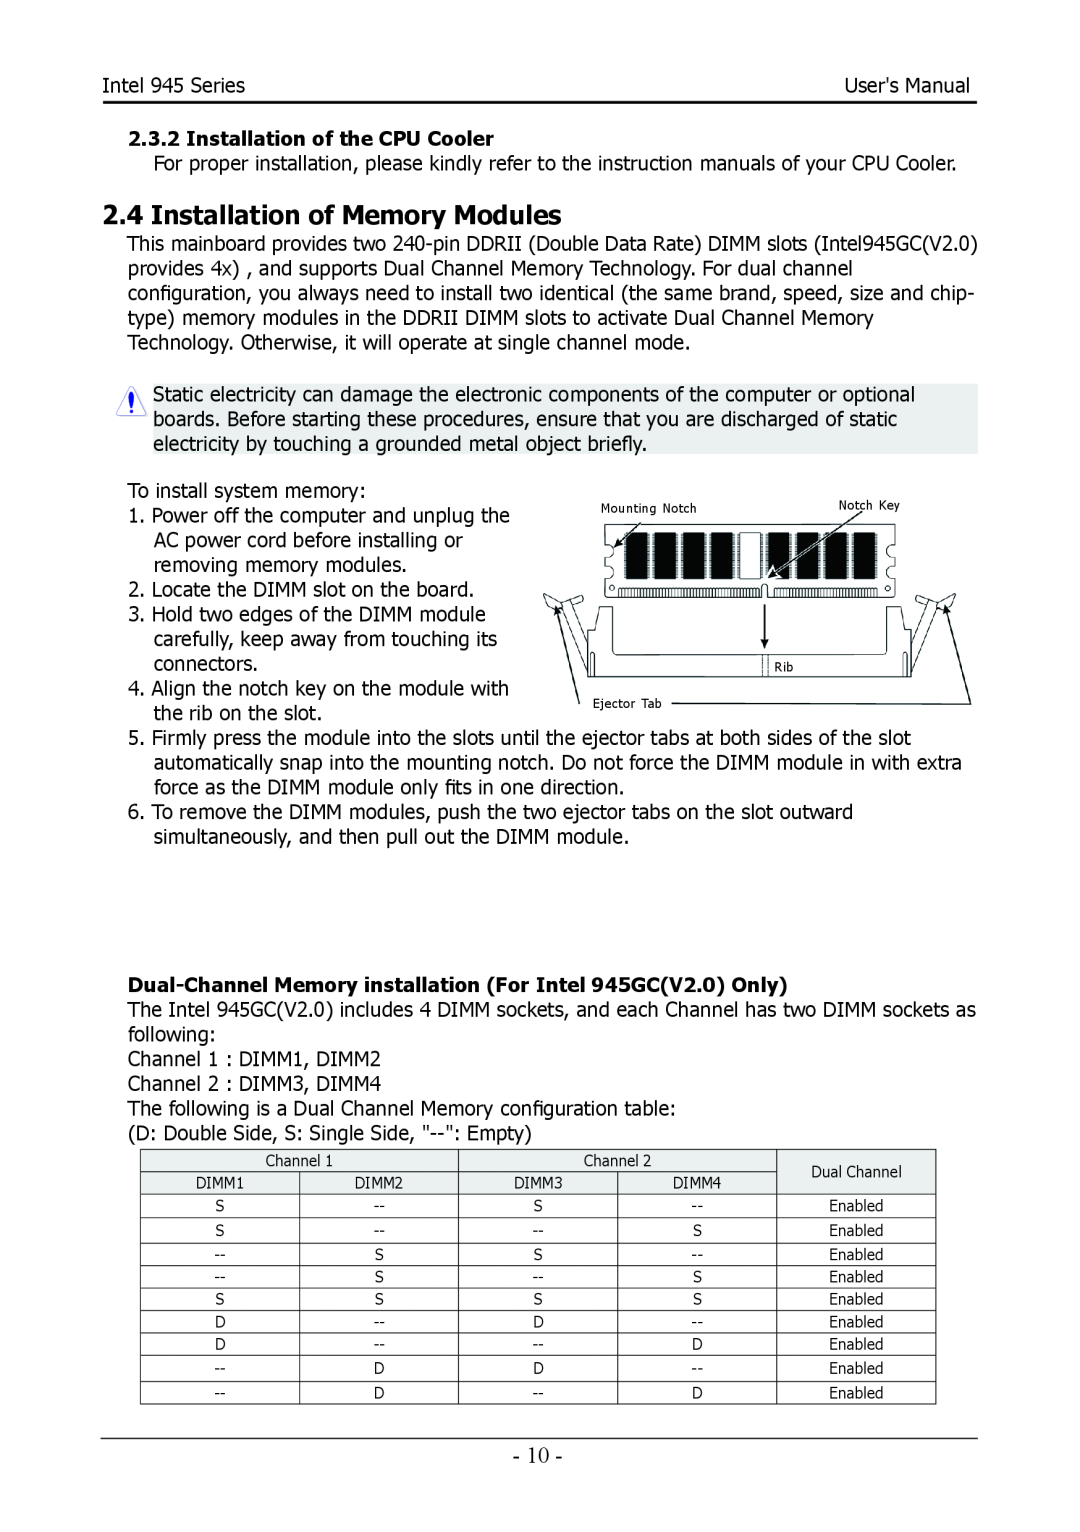 Intel 945GCT, 945GZT user manual Installation of Memory Modules, Installation of the CPU Cooler 